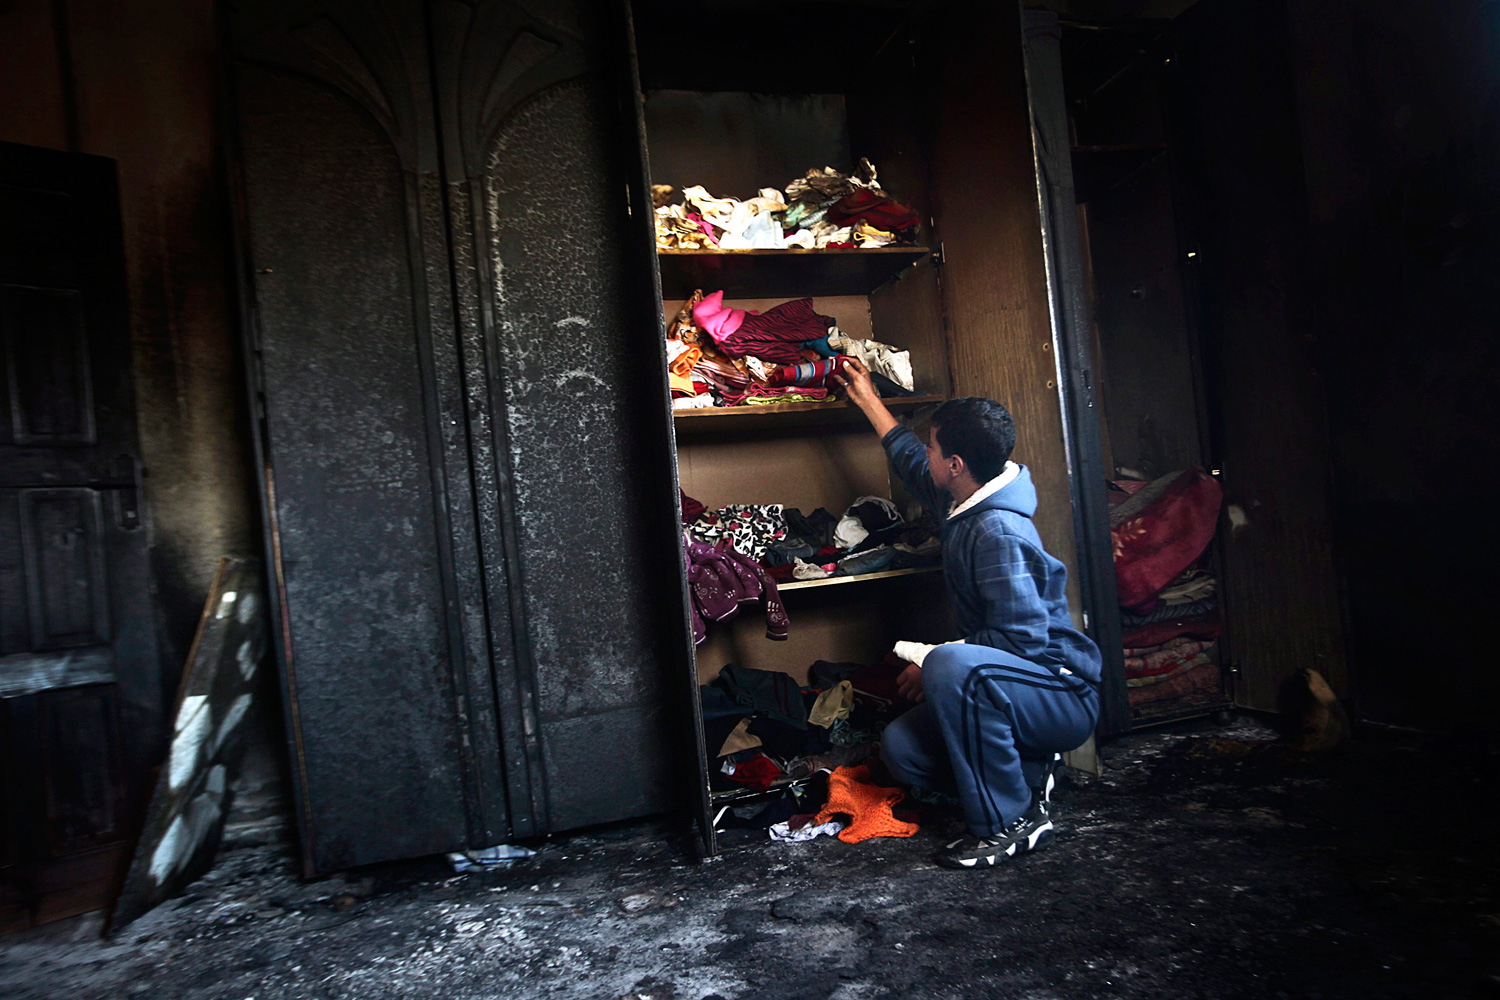 April 2, 2012. A Palestinian youth from the Bashir family inspects the rubble in the room of the three children who were killed in Deir al-Balah in the central Gaza Strip.